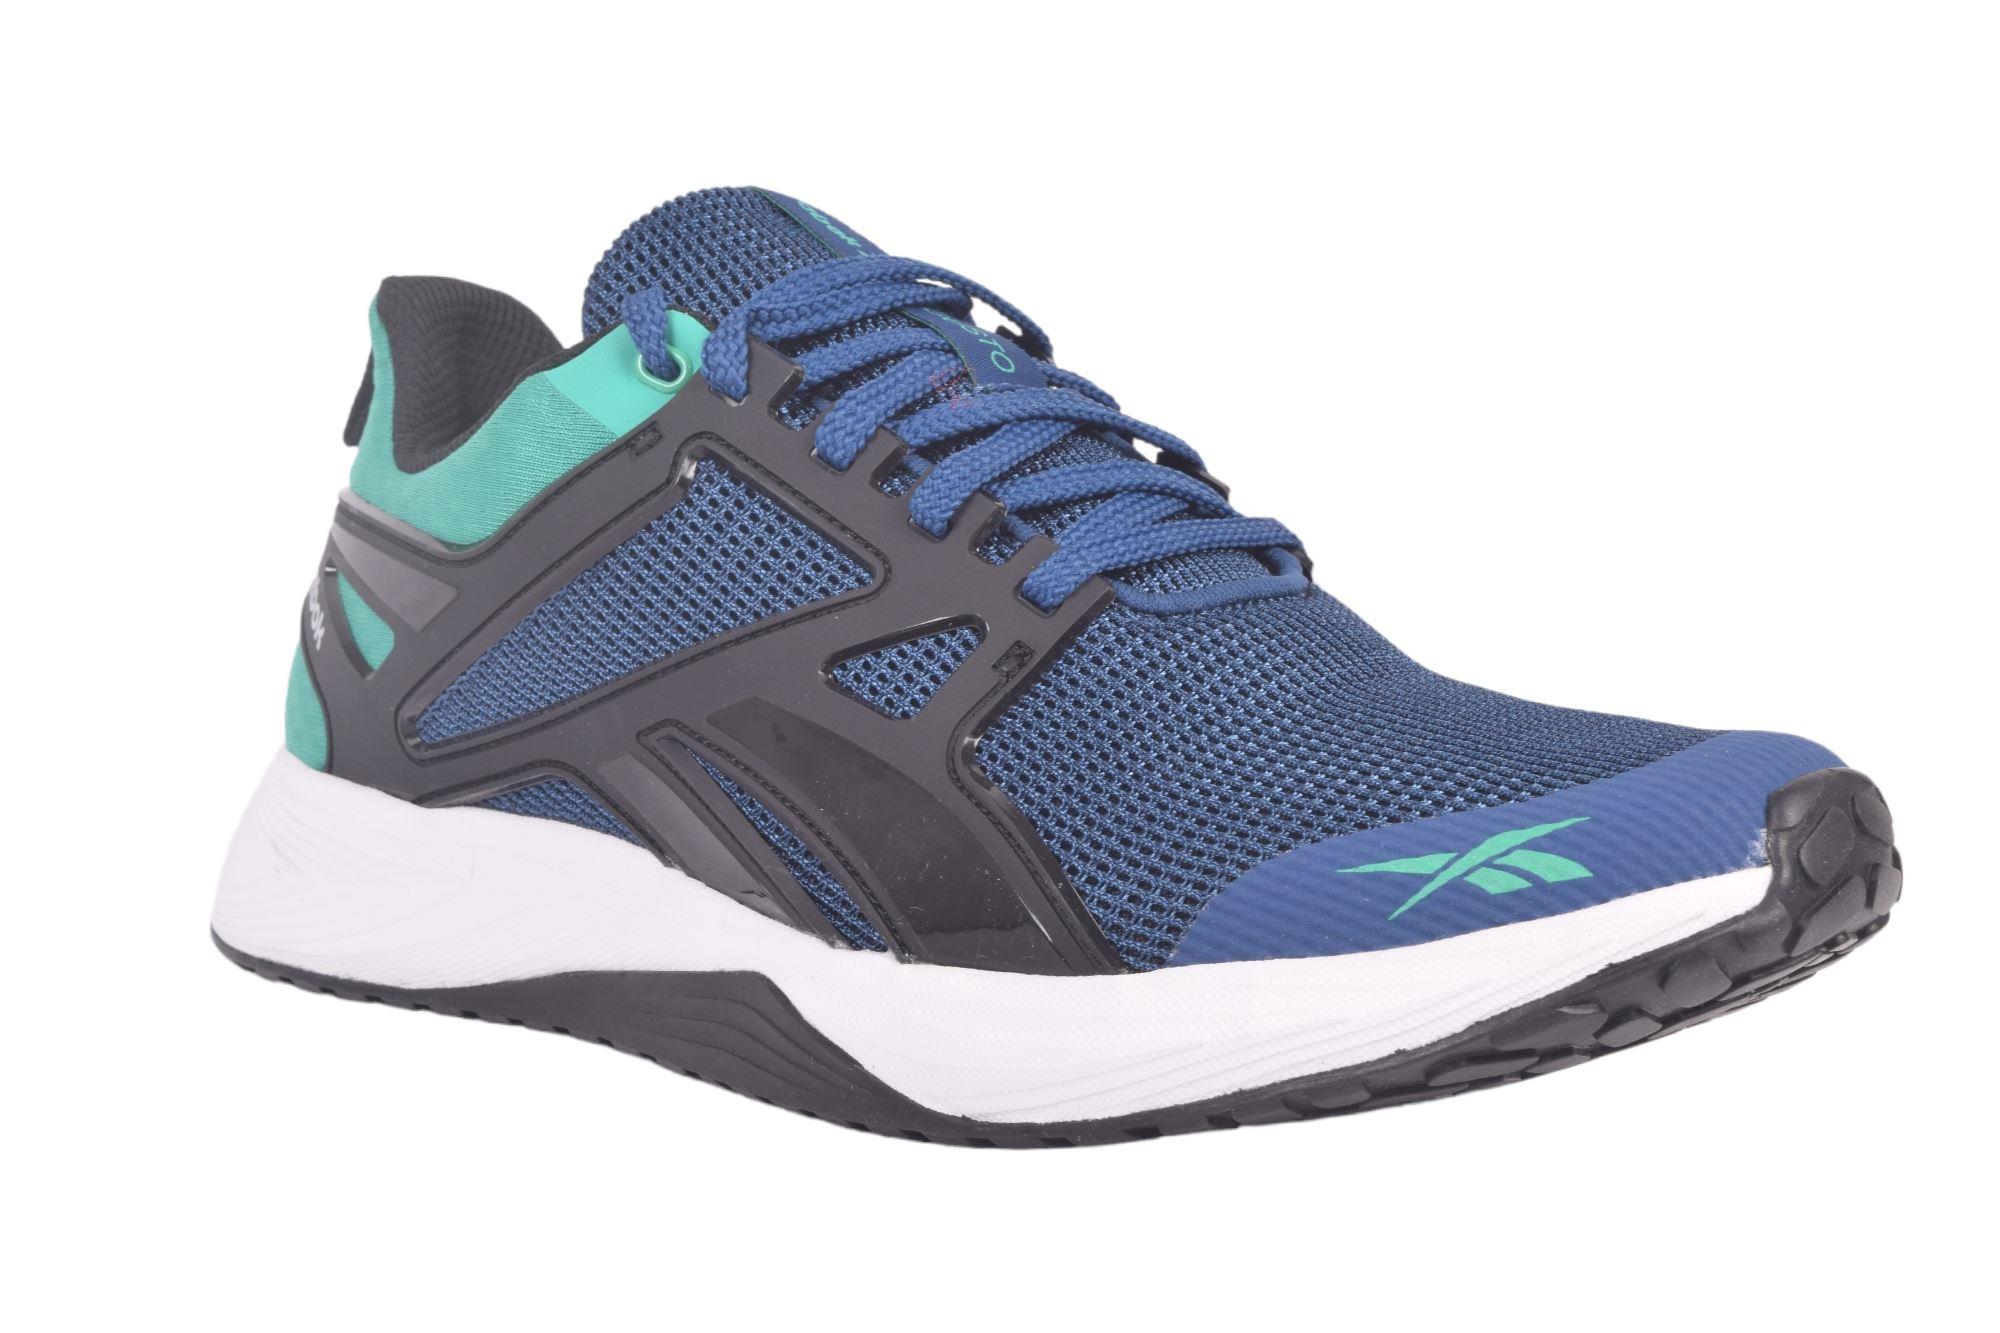 Hrx Shoes for Men - Buy Hrx Shoes Online in India | Myntra